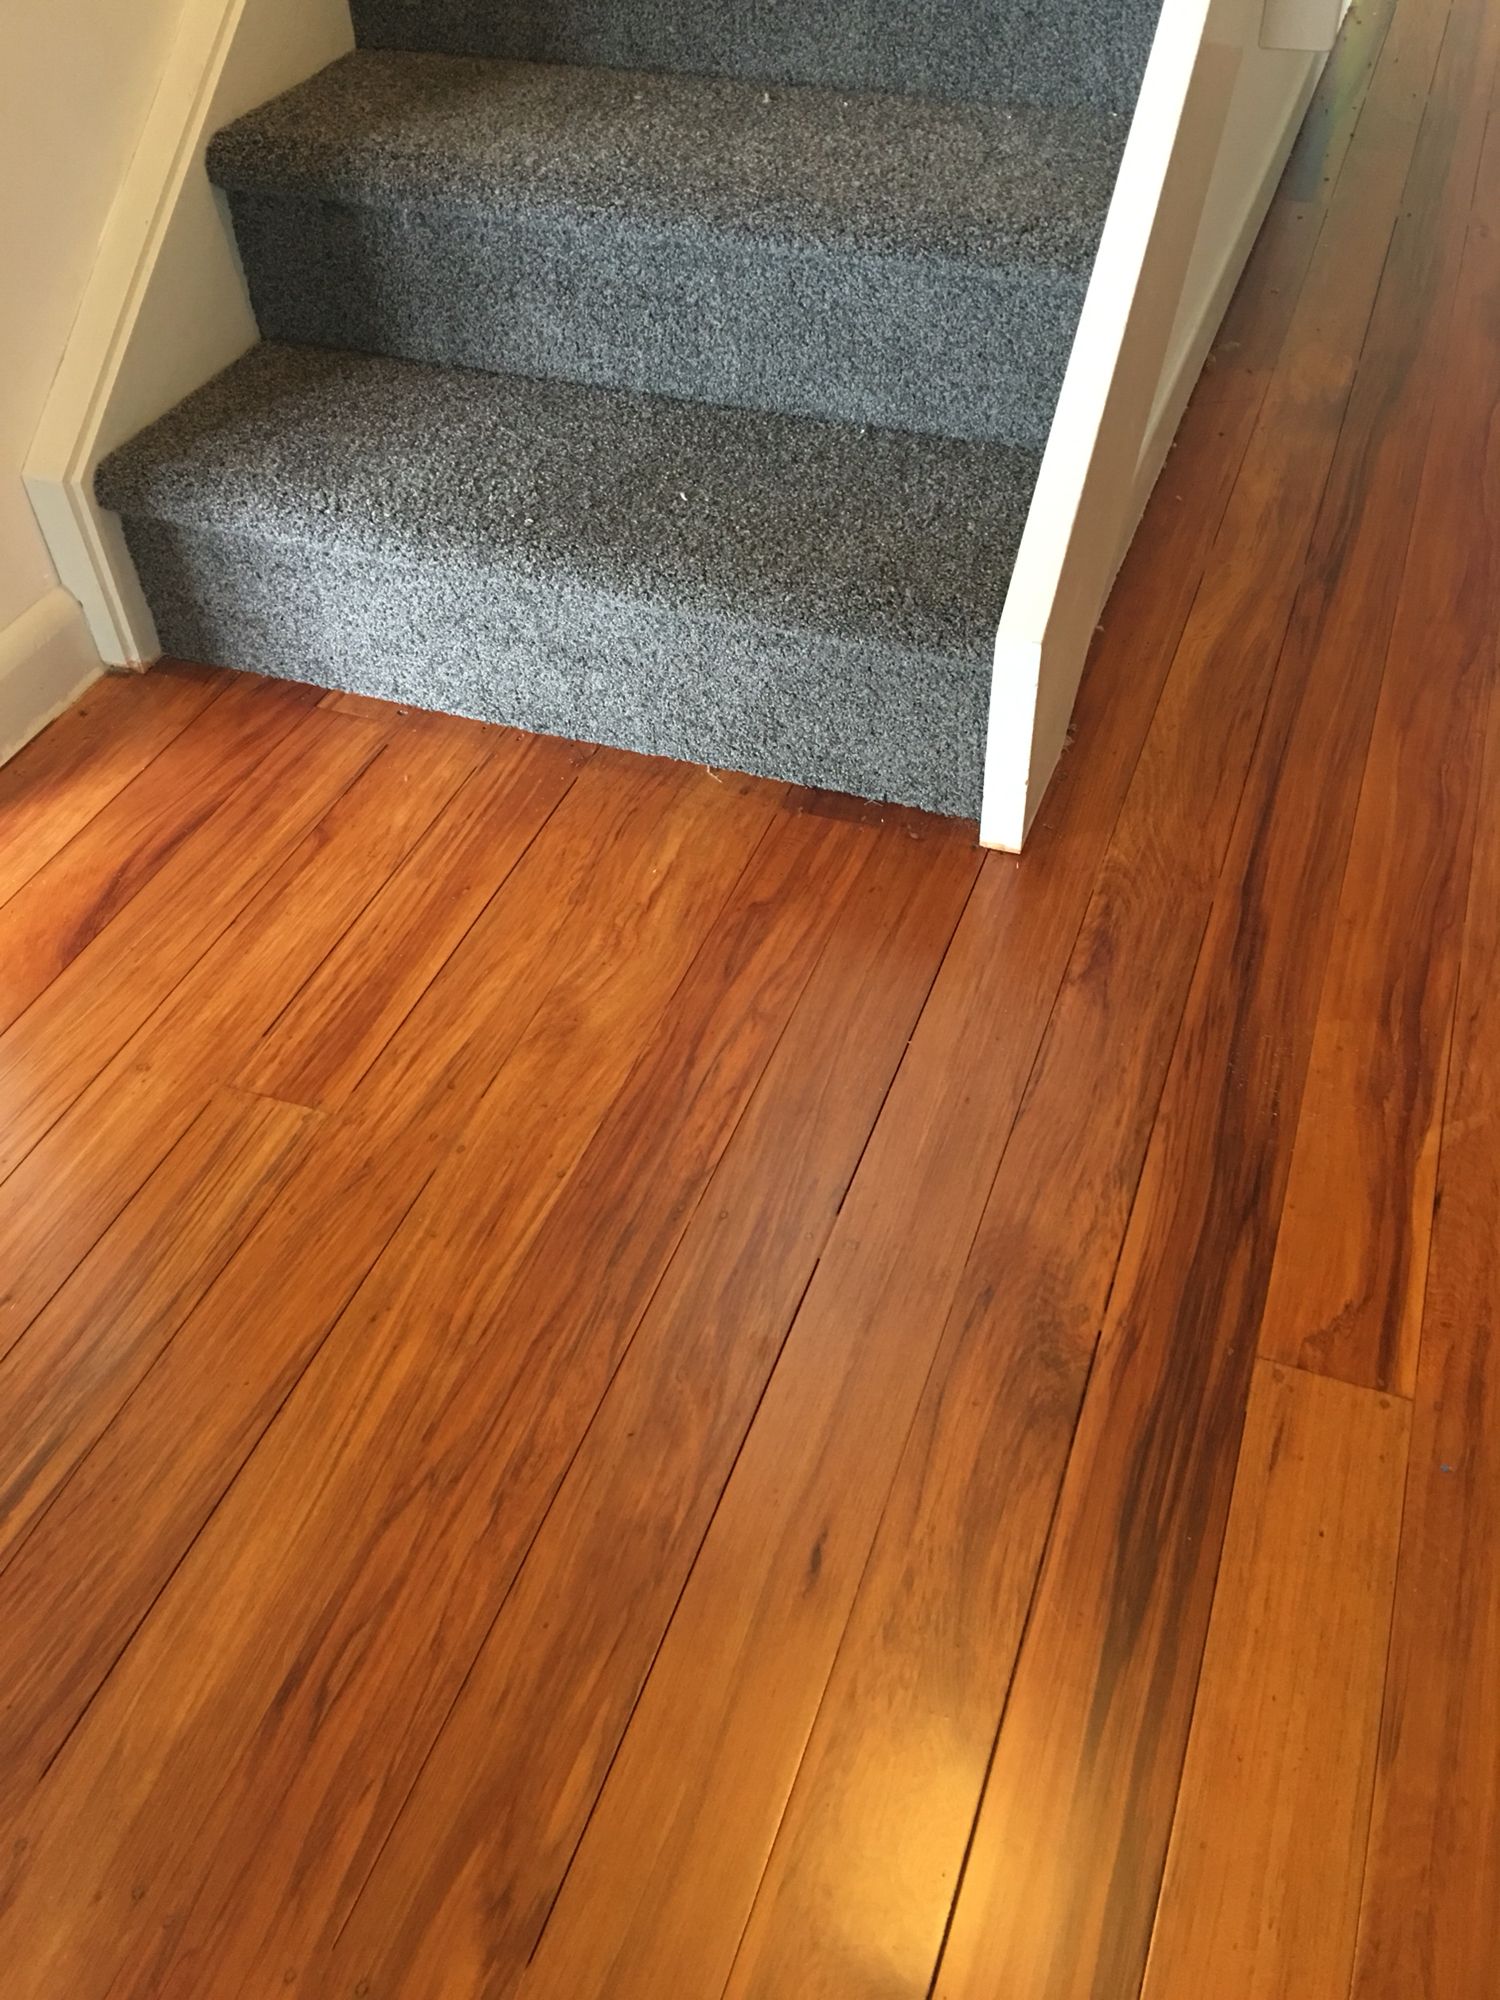 Pictures of flooring service